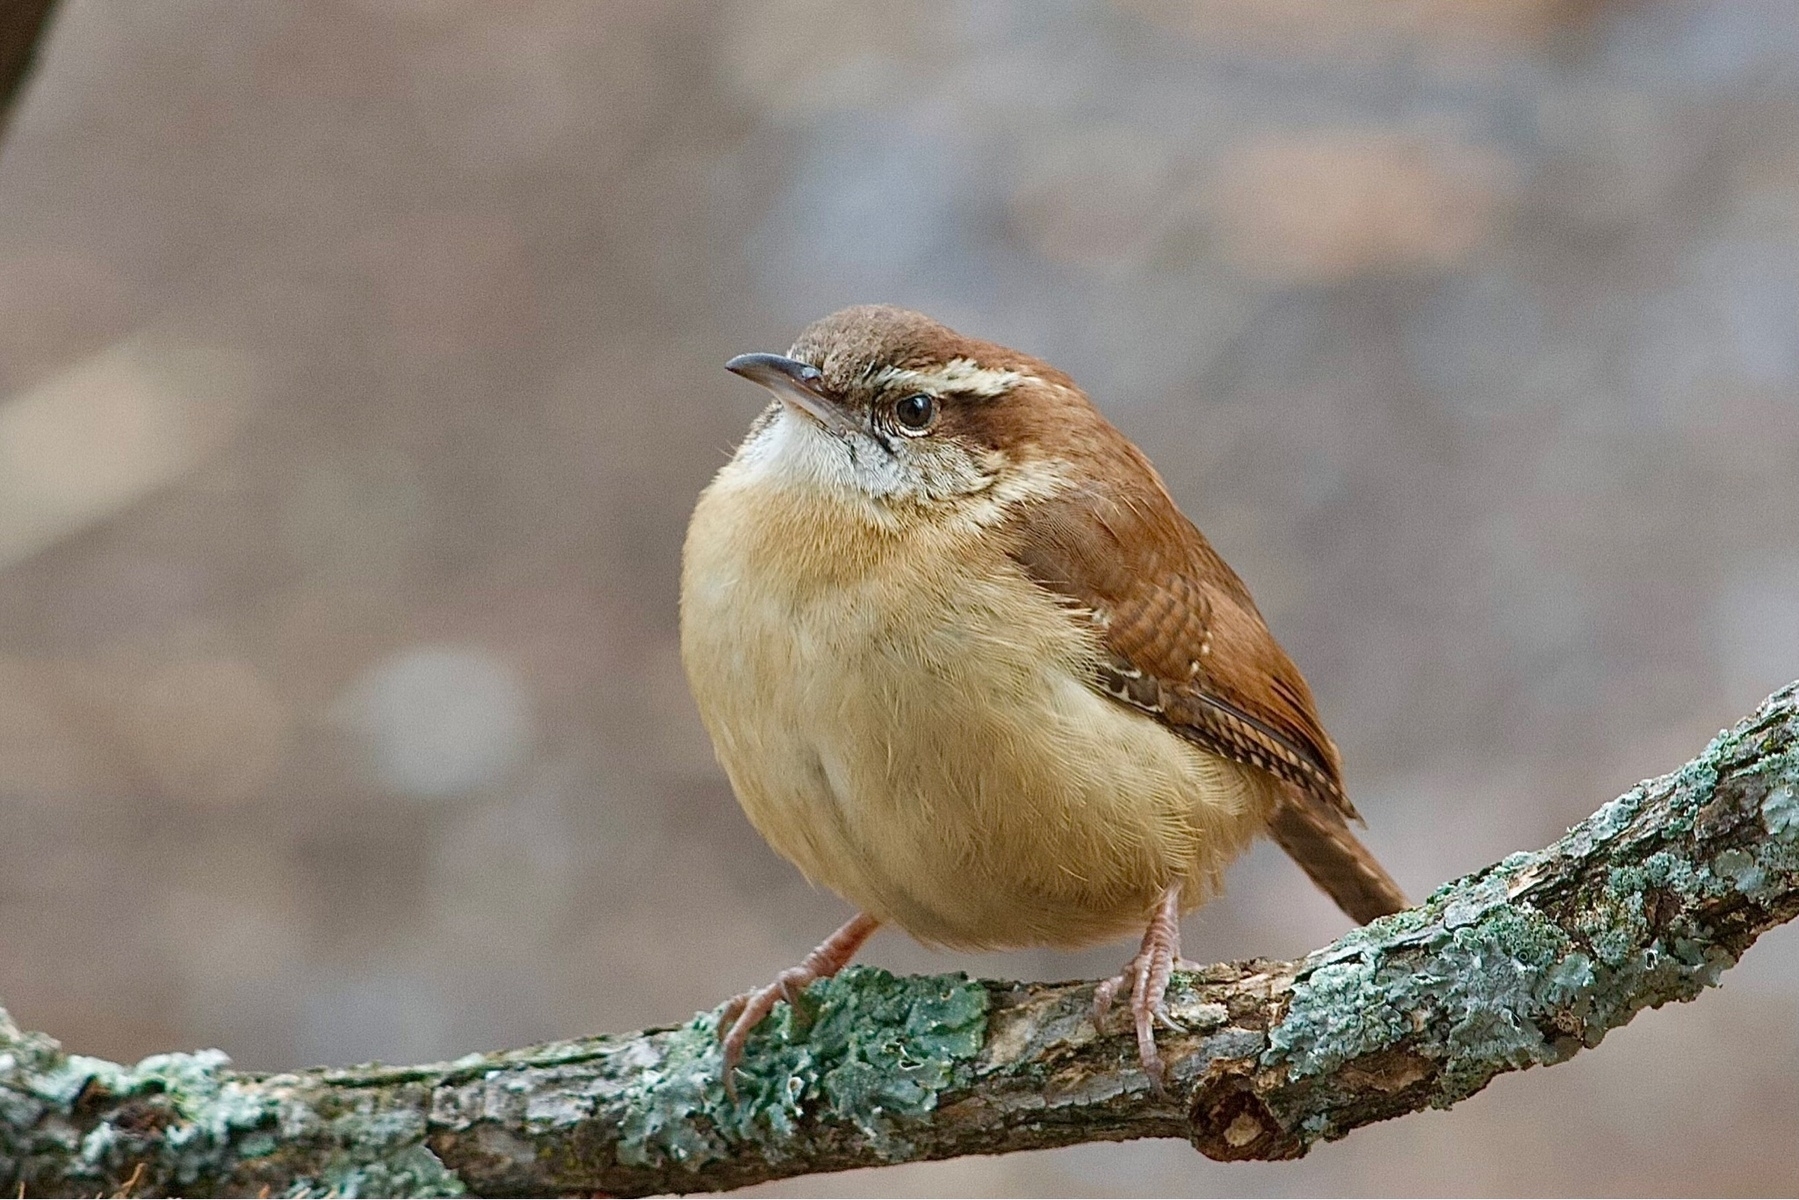 A small bird with a long white eyebrow, light brown underside and darker brown backside is perched on a lichen covered branch set against a blurred brown background.